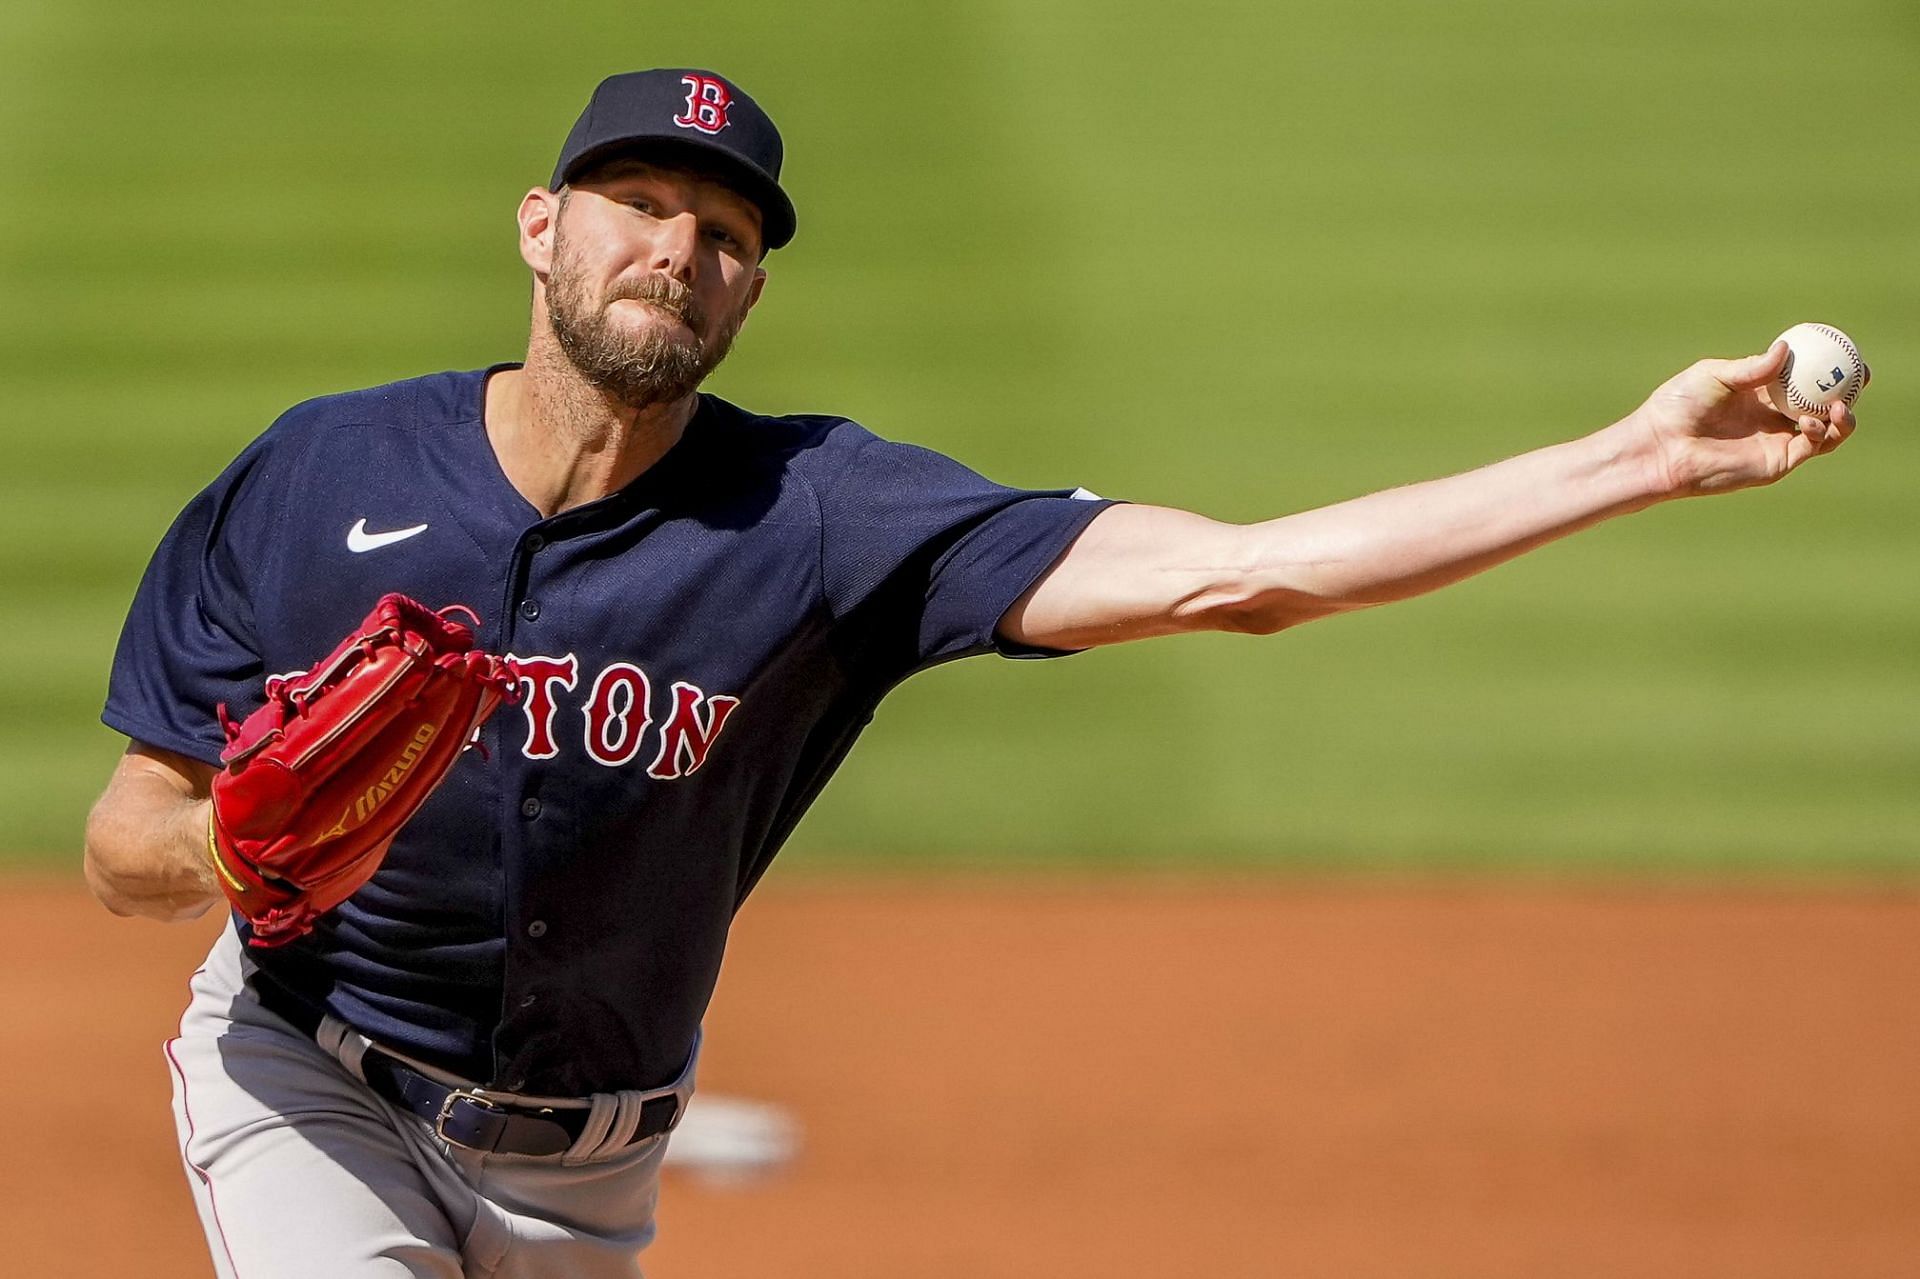 Chris Sale has been traded